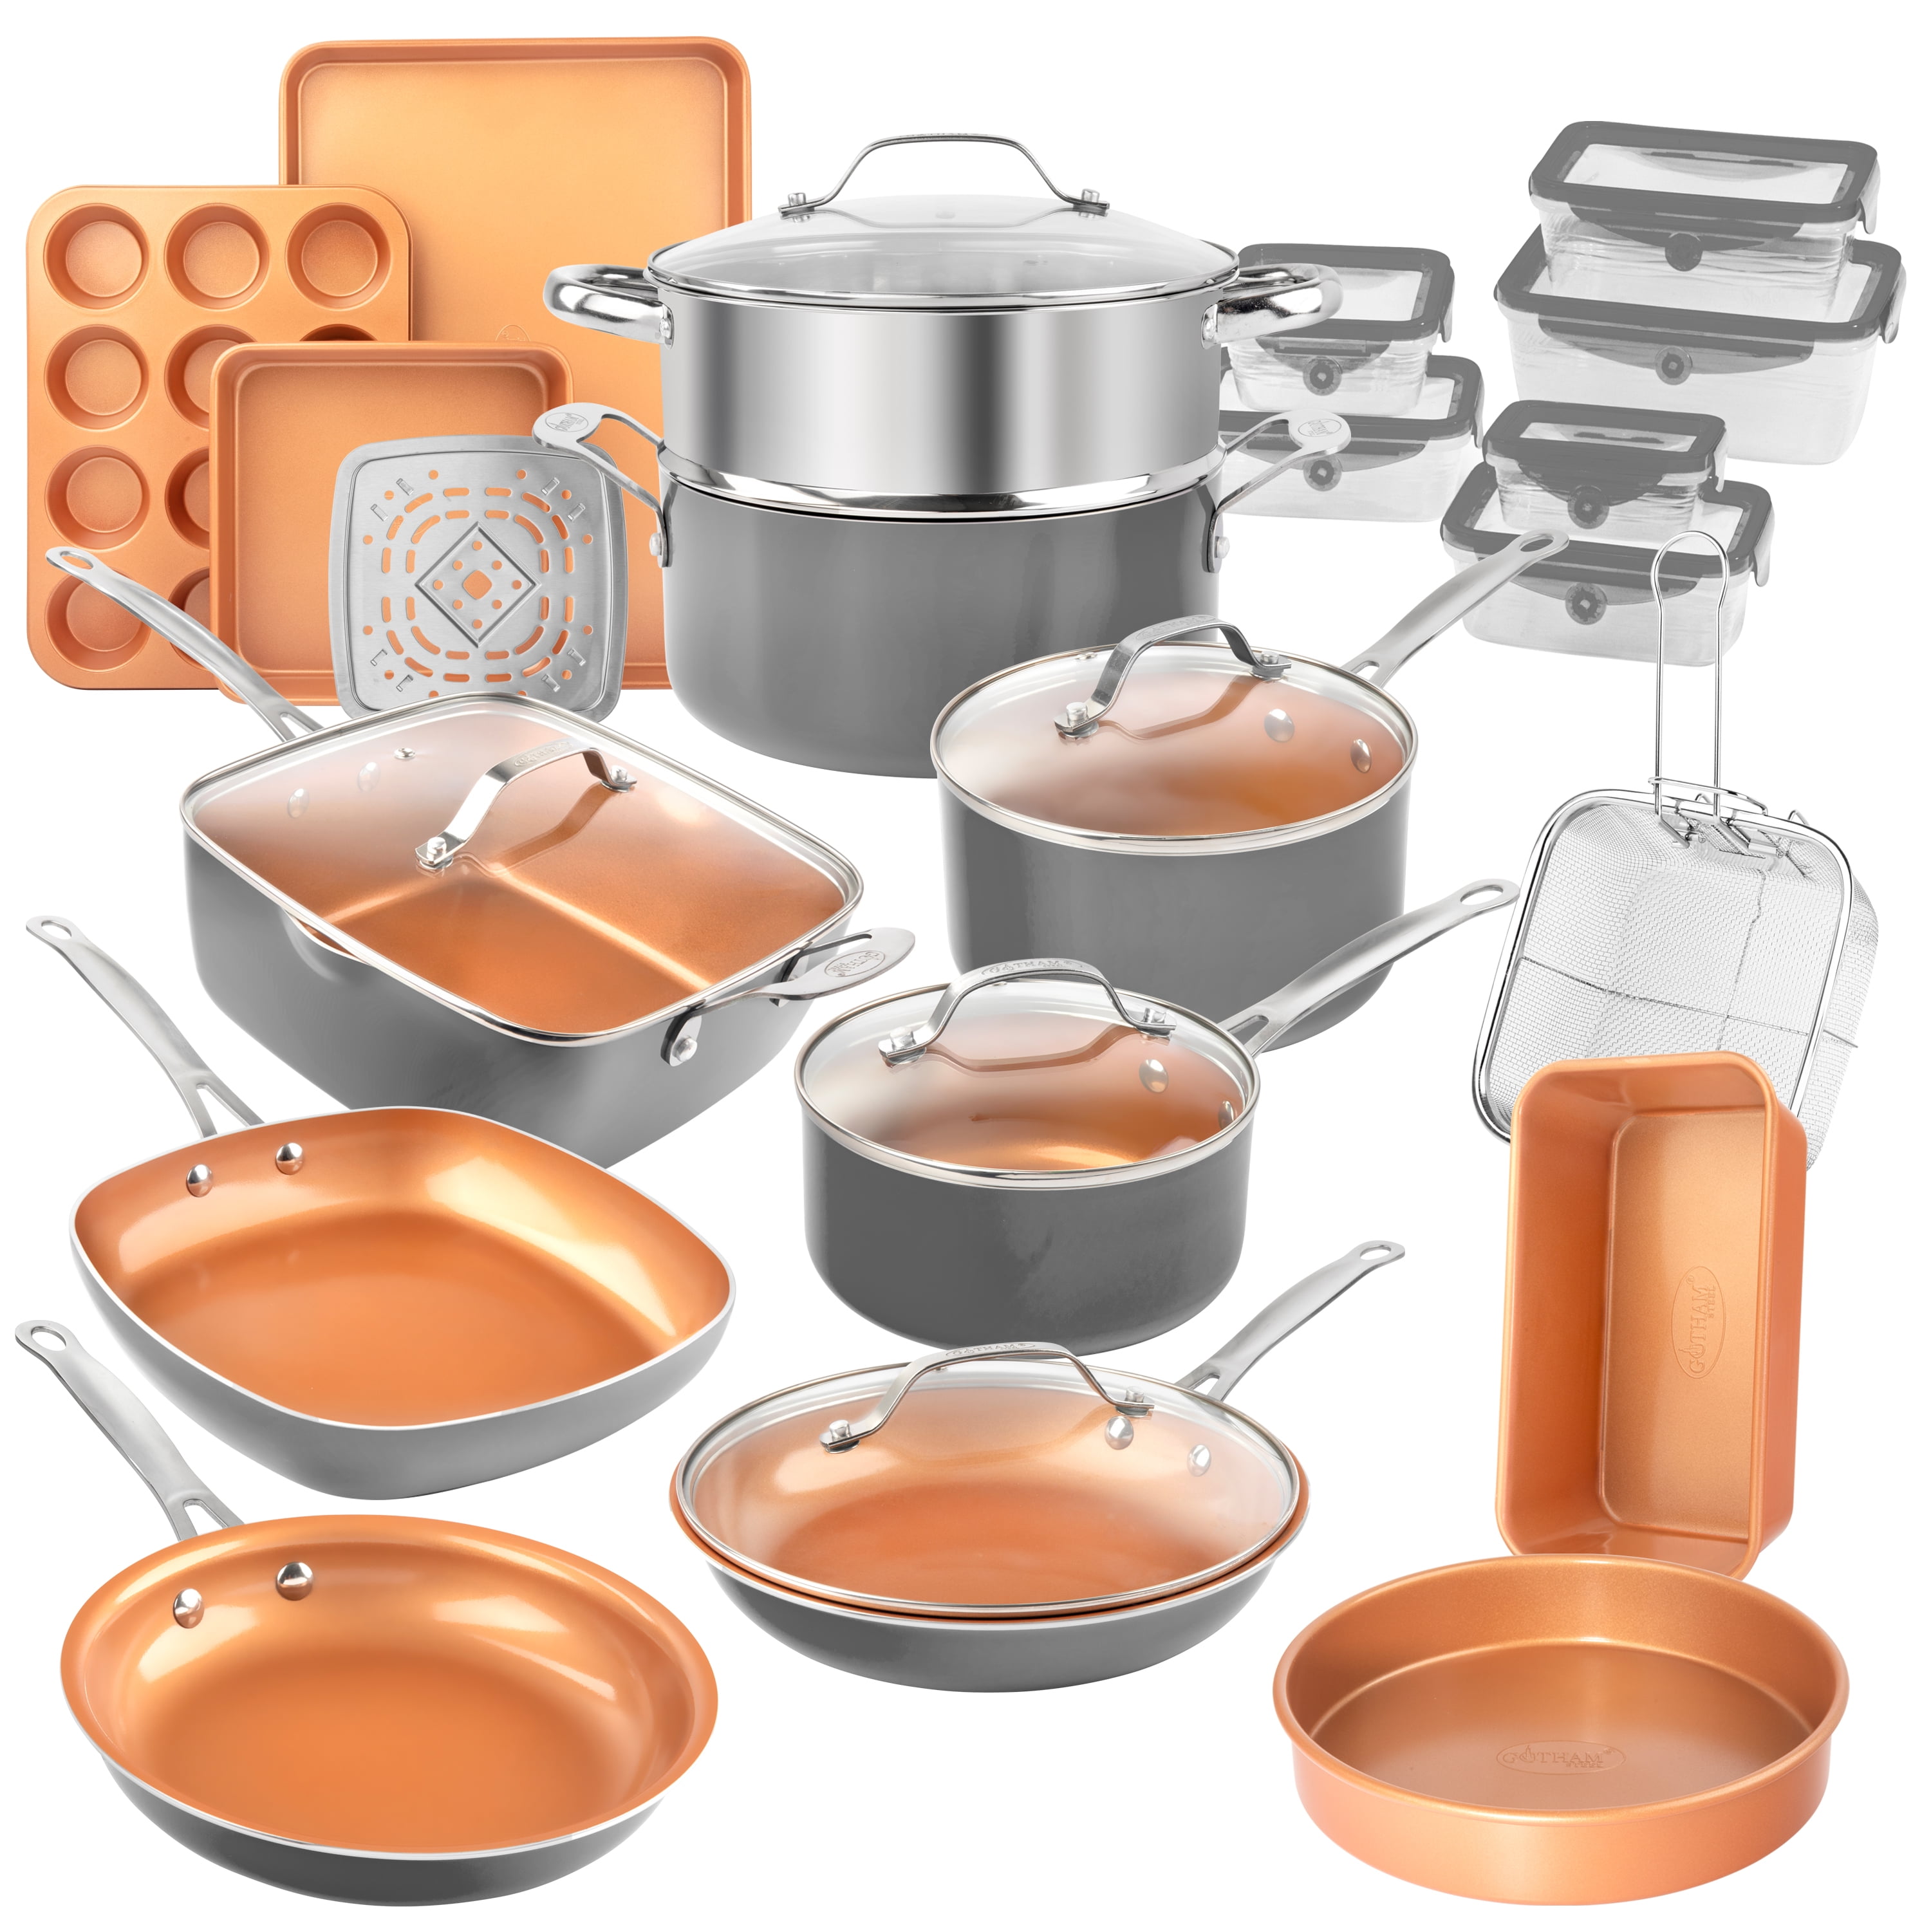 Gotham Steel 32 Piece Cookware Set, Bakeware and Food Storage Set, Nonstick Pots and Pans, Gray